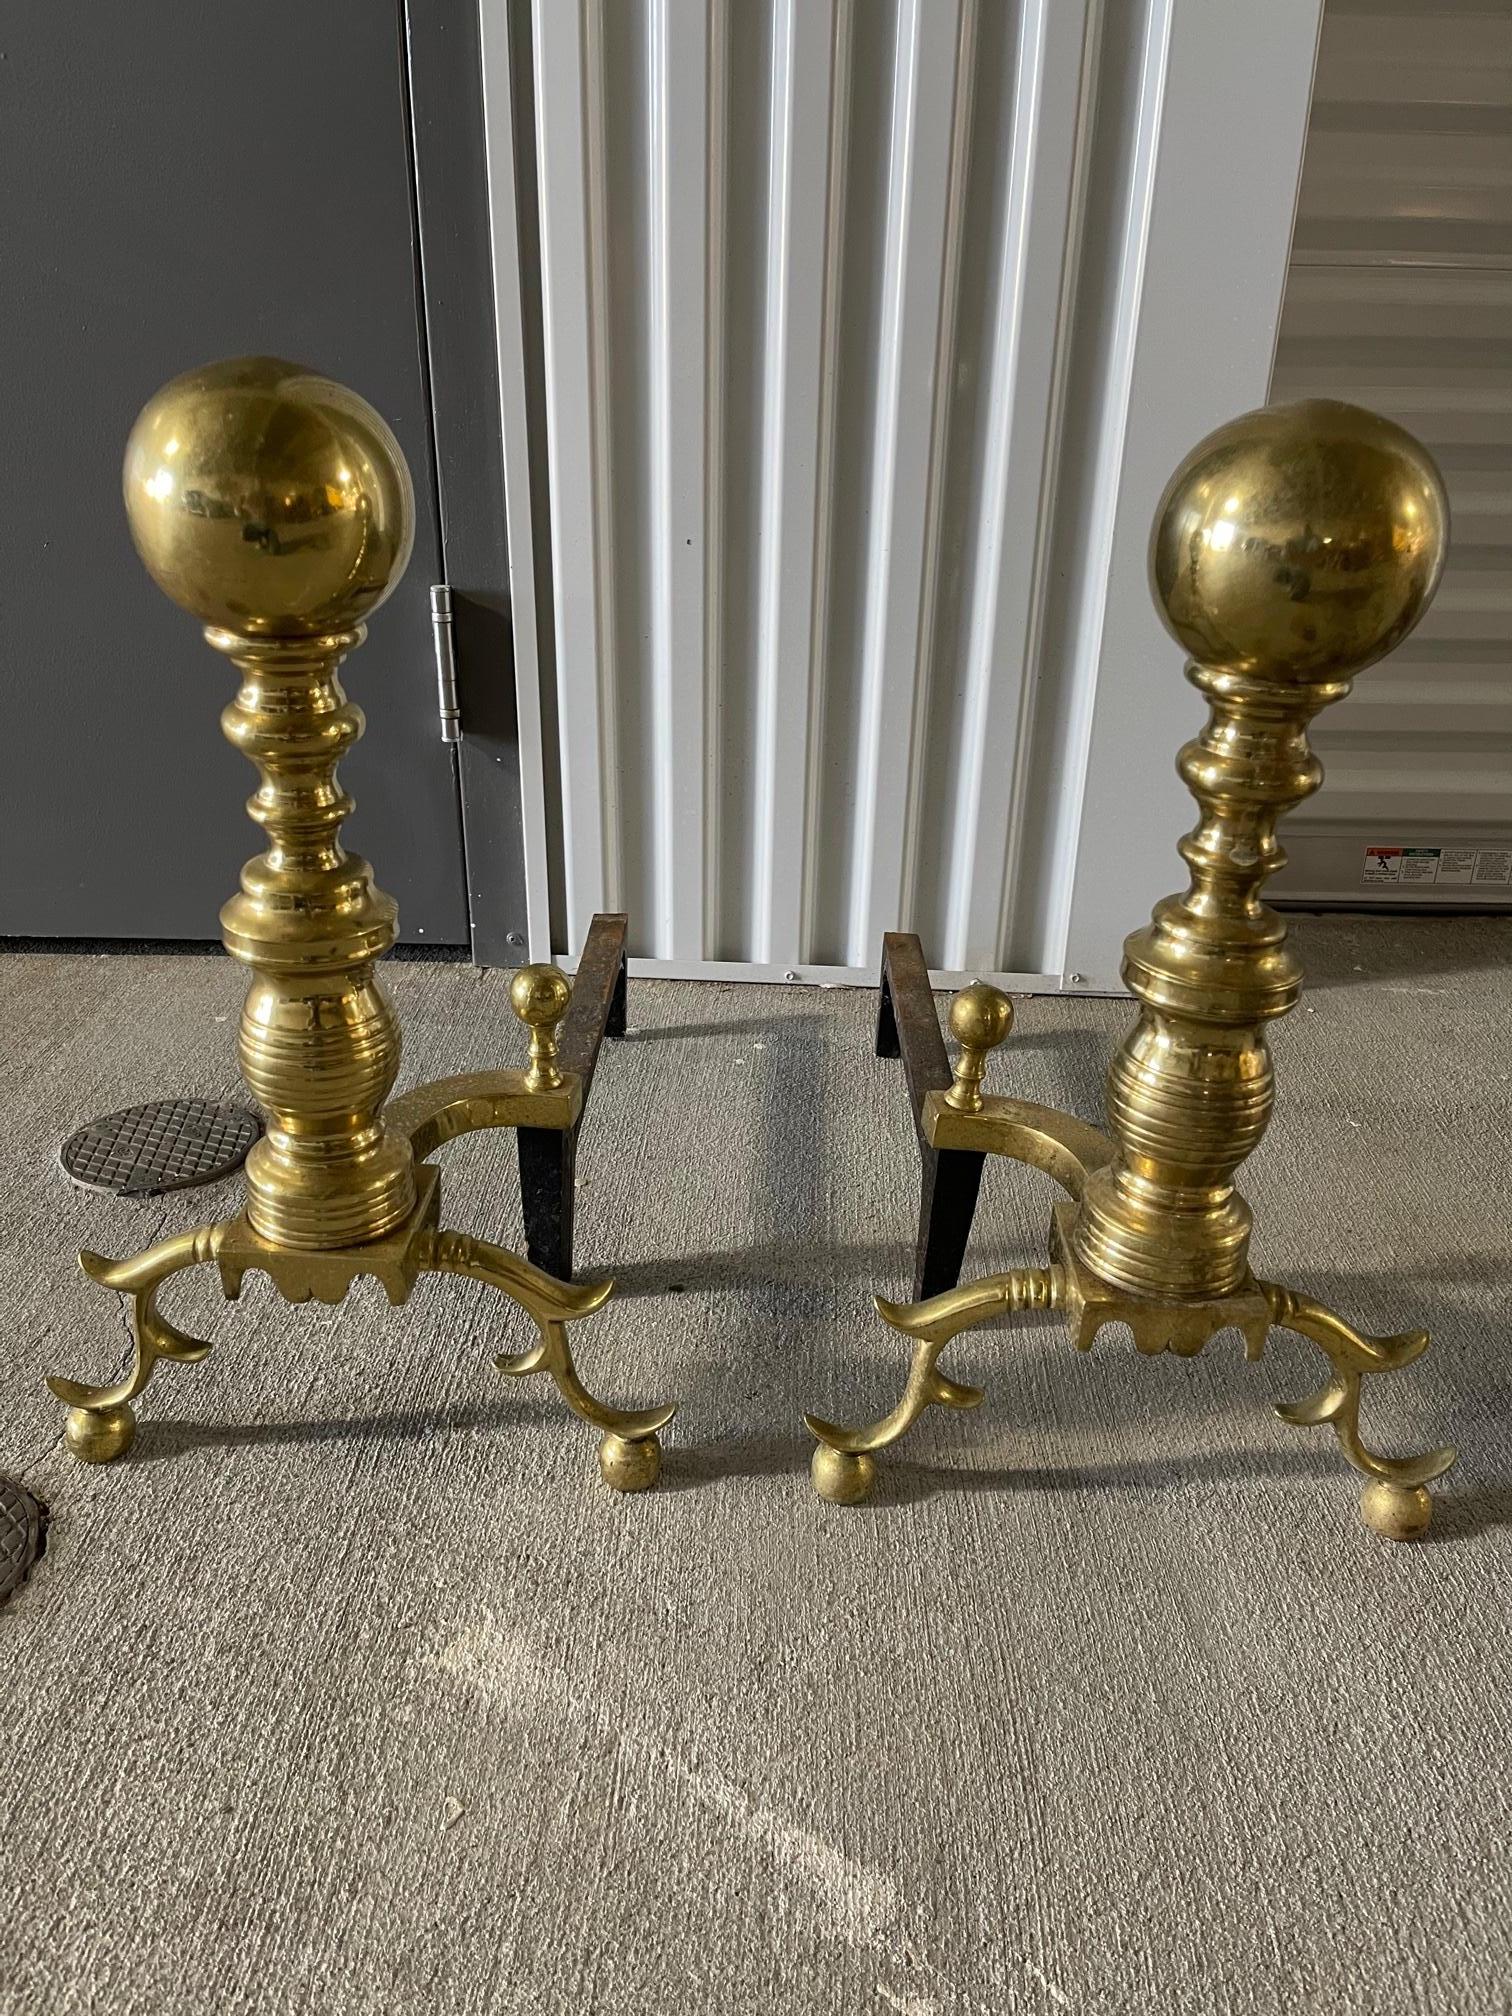 Pair of brass andirons with a decorative ball at top and feet, late 19th century.
 